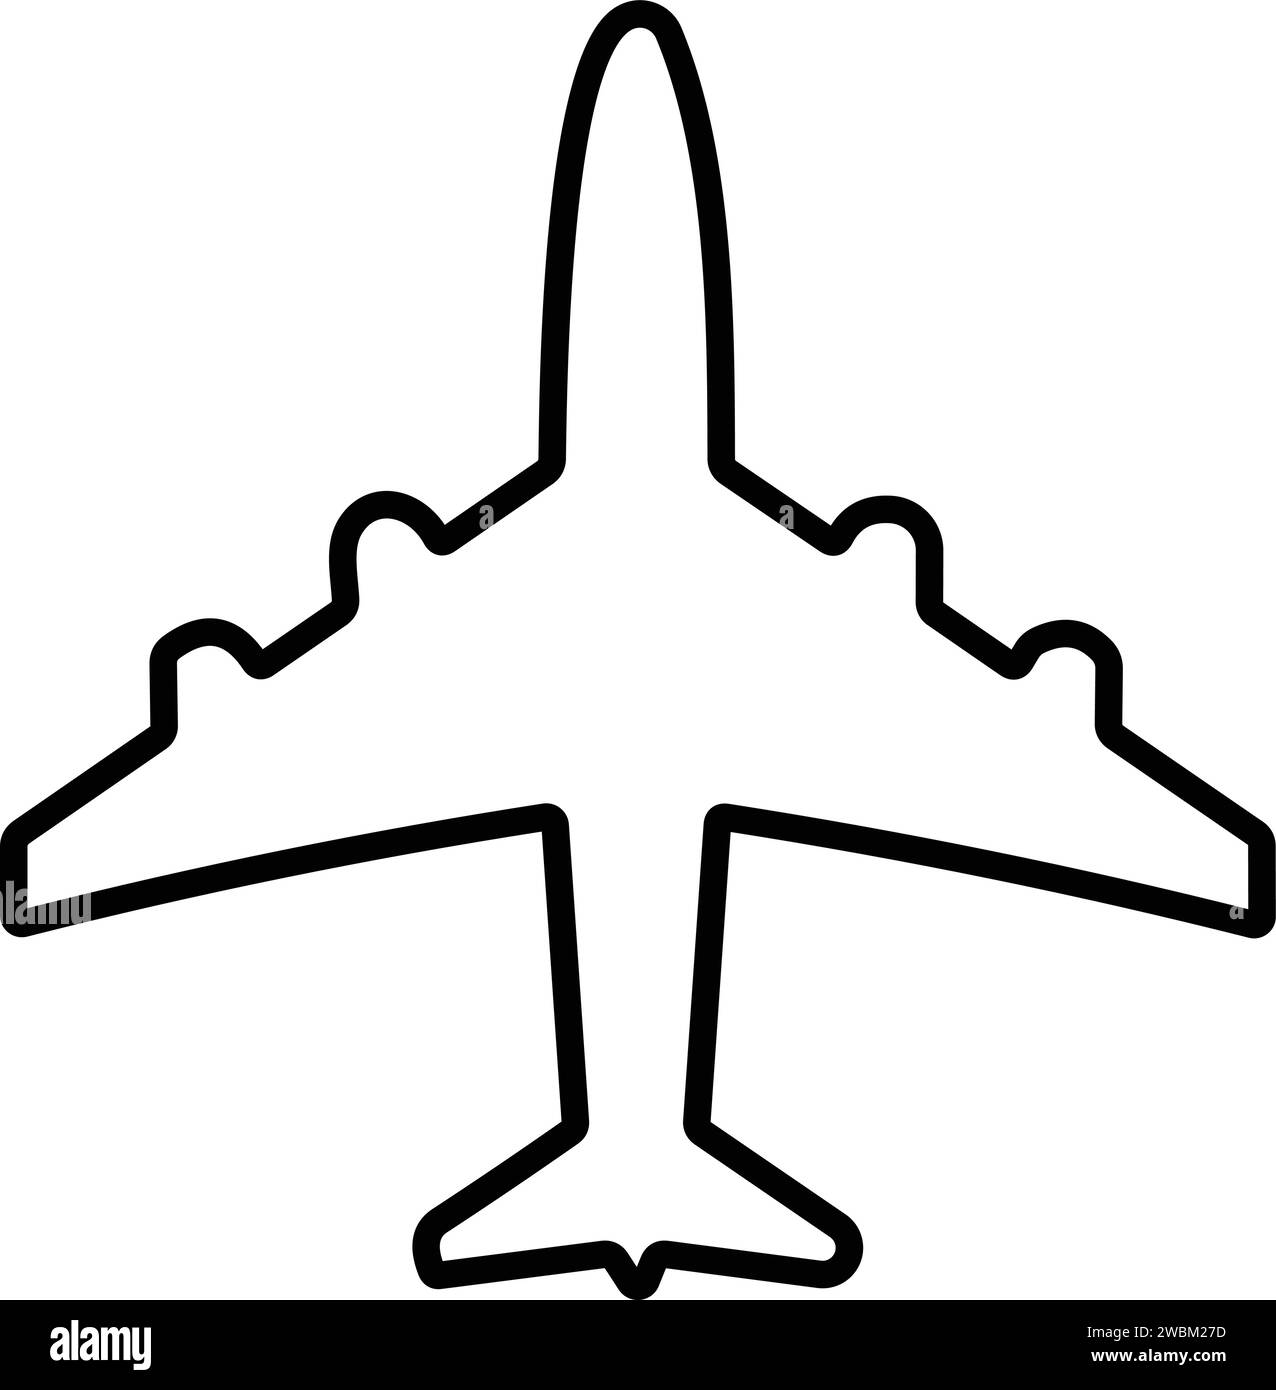 Airplane icons. Aircrafts line style. jet plane. flight travel symbol. Stock Vector